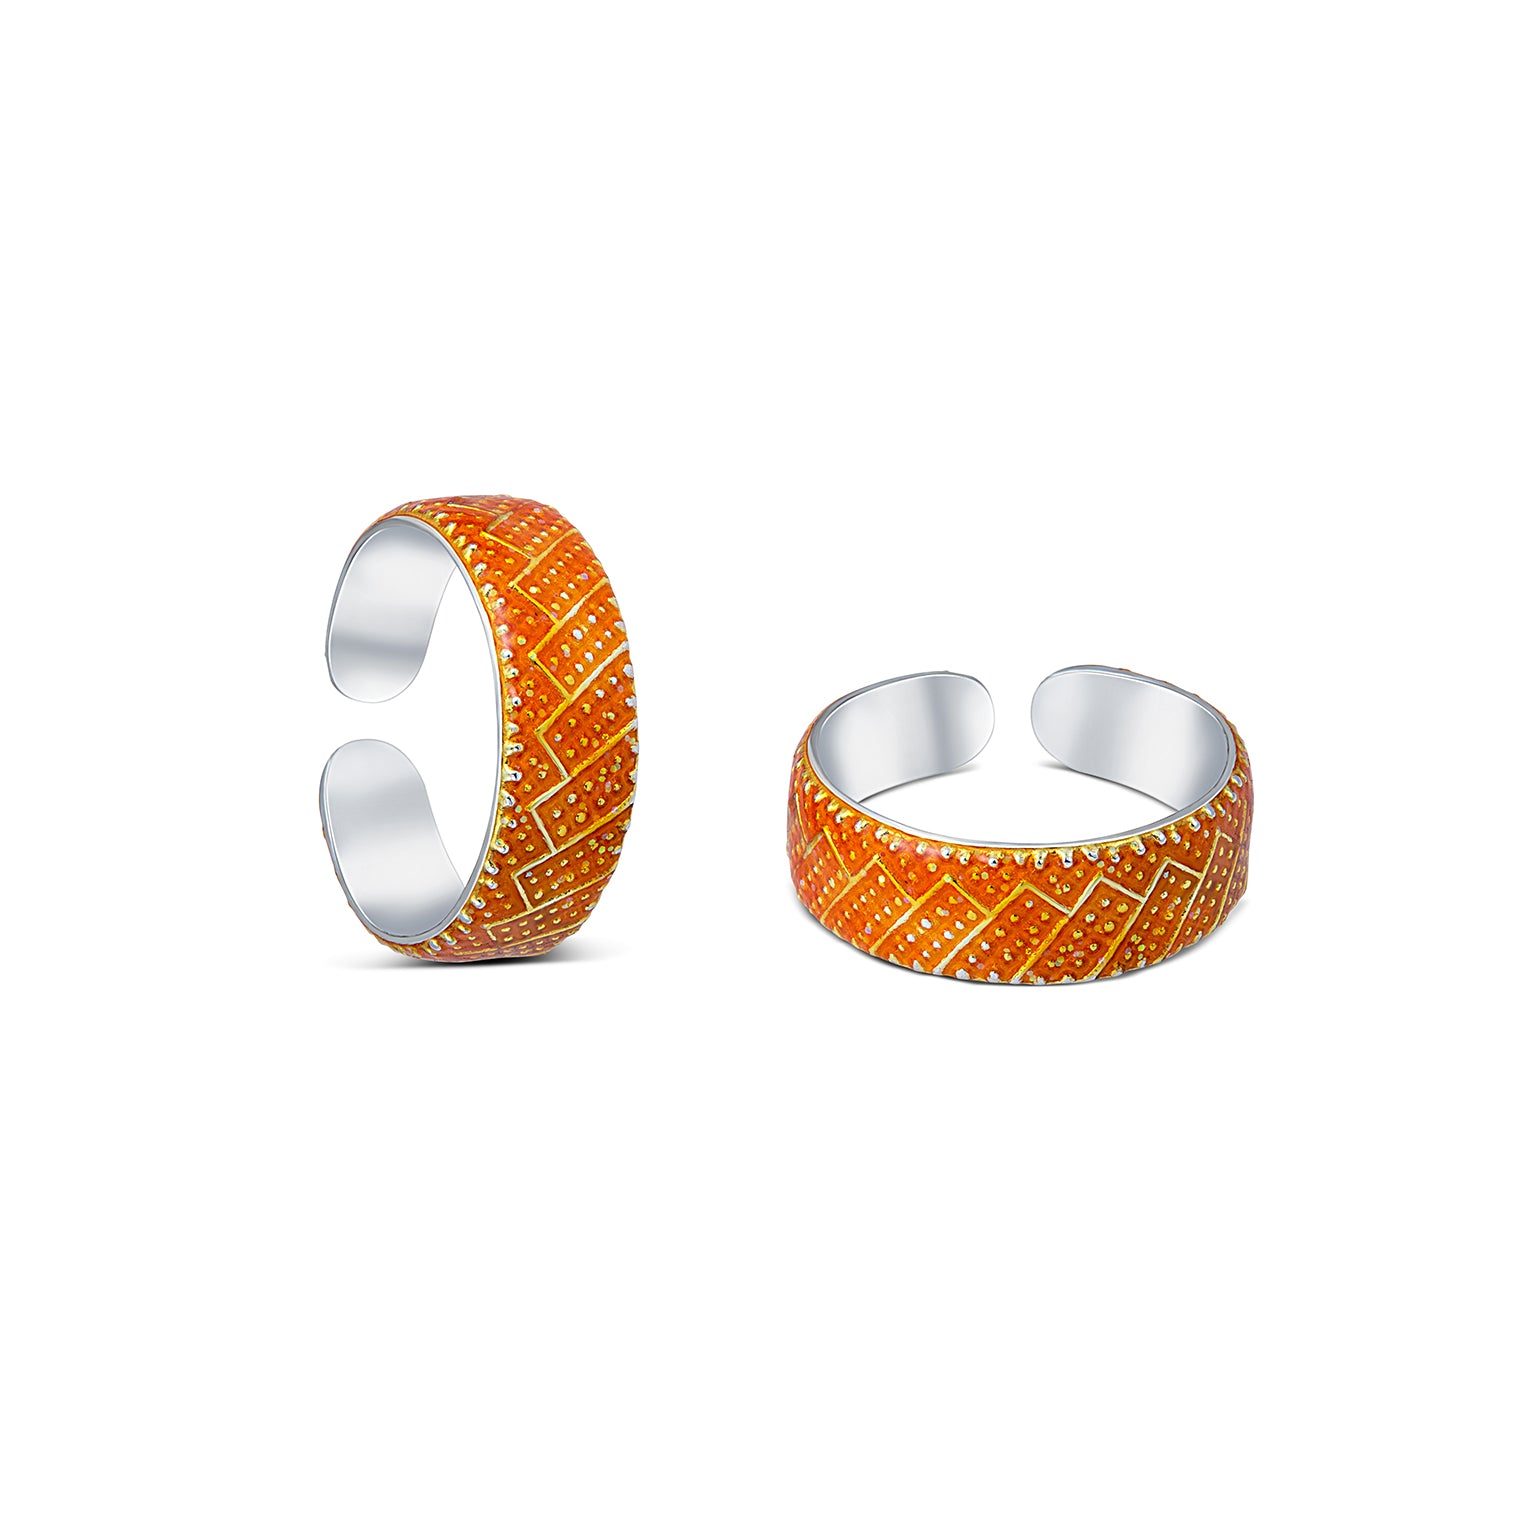 Elevate your toe game with Raajraani's stylish and unique sterling silver toe ring for women. Featuring a charming orange enamel finish, our handmade Zoya toe rings are the perfect accessory for any outfit. Check out our collection now!